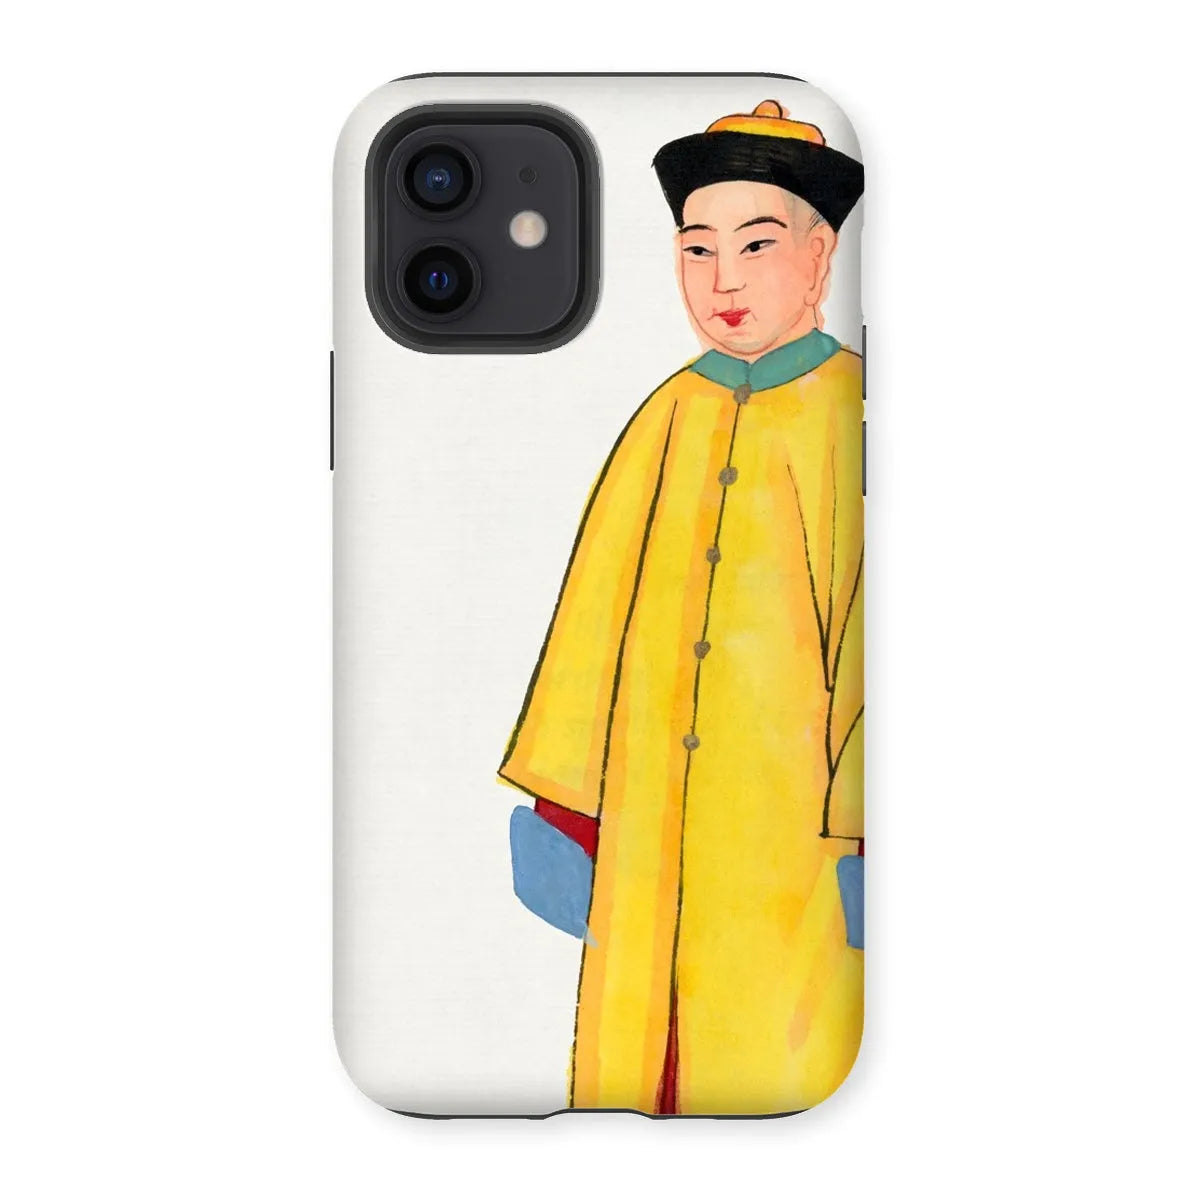 Priest In Yellow Robes - Chinese Aesthetic Art Phone Case - Iphone 12 / Matte - Mobile Phone Cases - Aesthetic Art